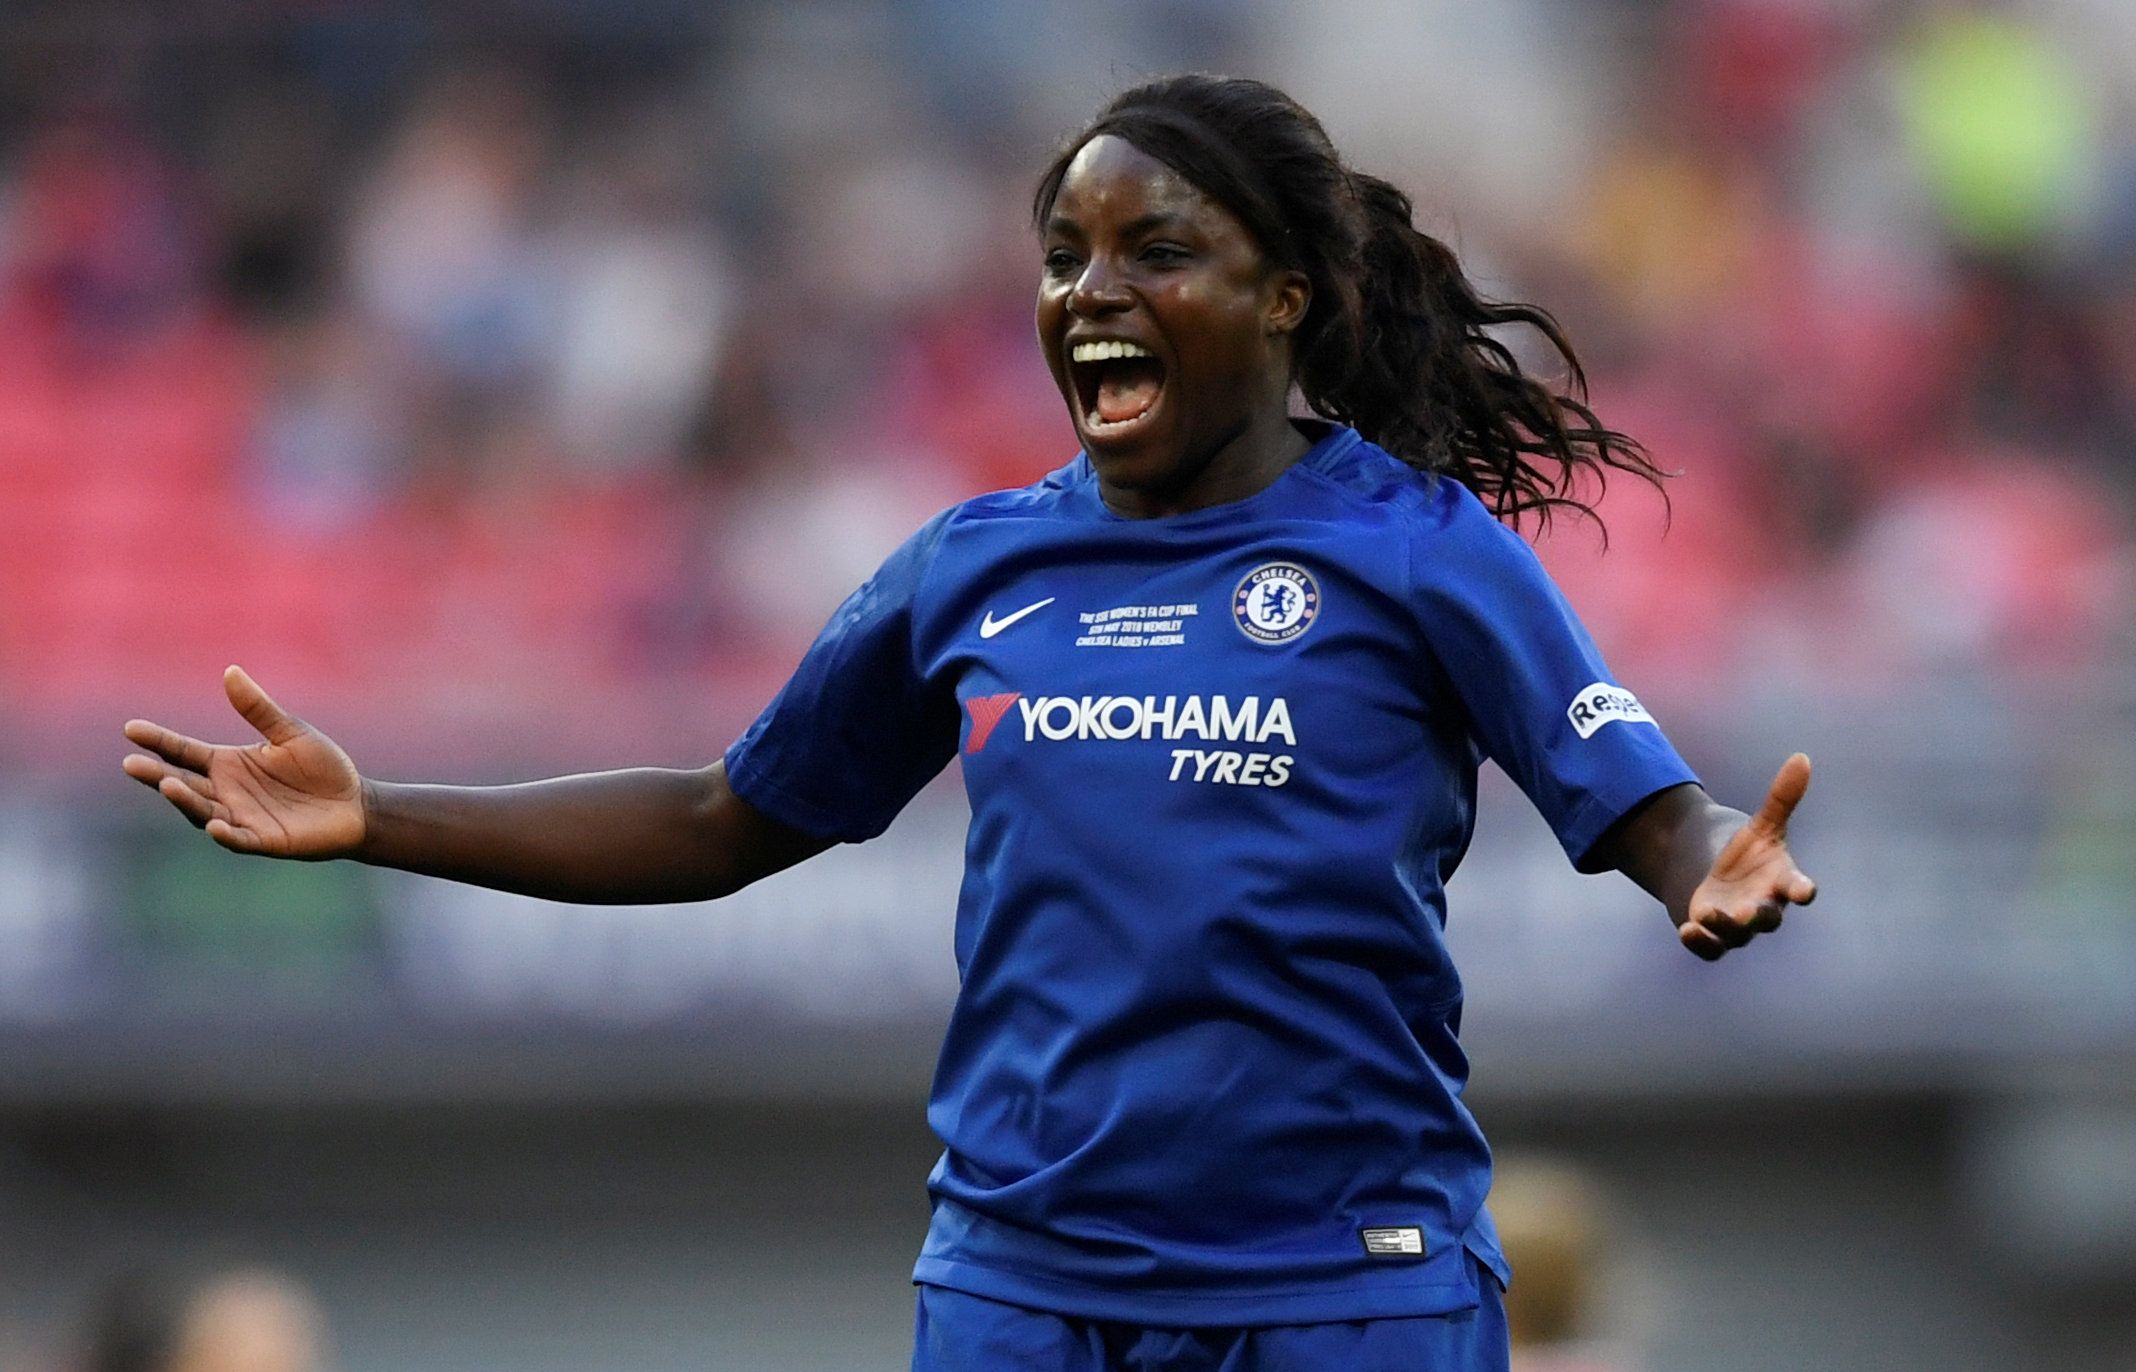 Soccer Football - Women's FA Cup Final - Arsenal vs Chelsea - Wembley Stadium, London, Britain - May 5, 2018   Chelsea’s Eniola Aluko celebrates after the match    Action Images via Reuters/Tony O'Brien